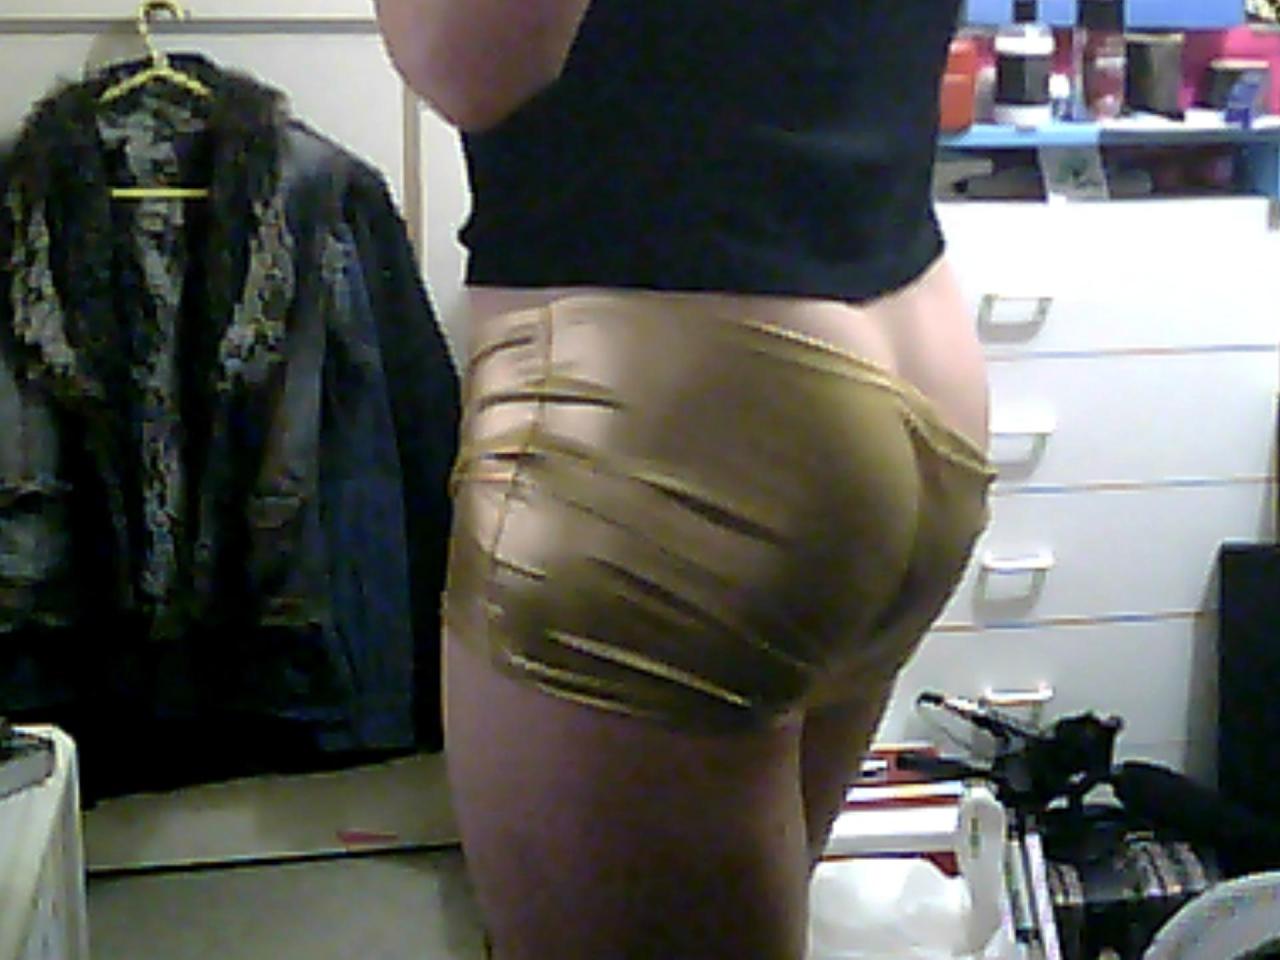   Happy National Underpants Day! (8 / 8)Hurray! Golden booty shorts for dat golden